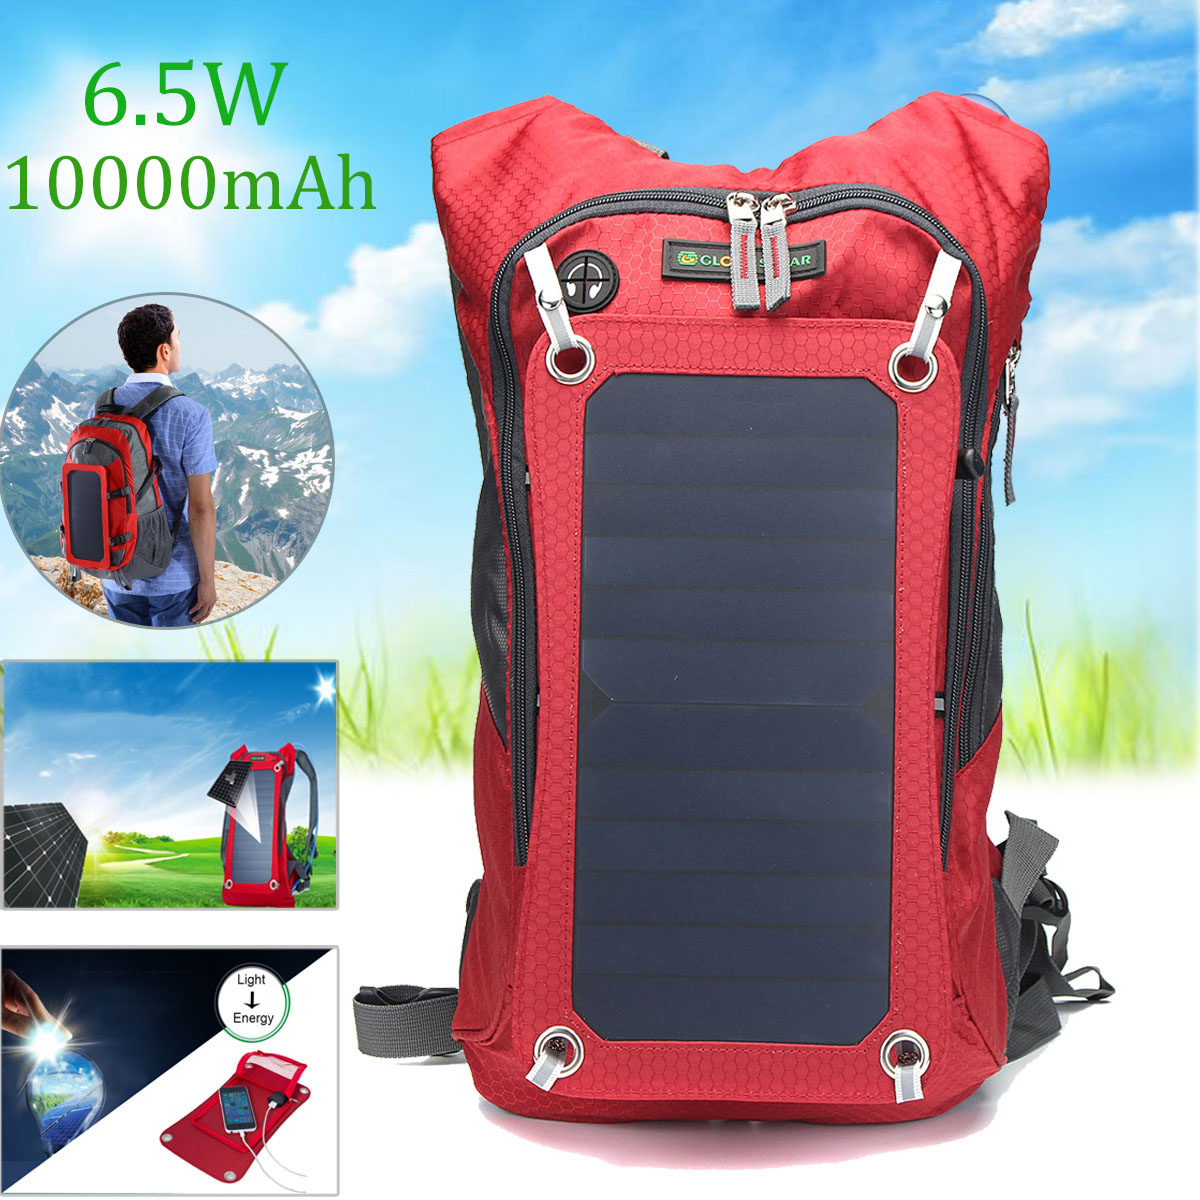 

Outdoor Travel Bag 6.5W Solar Panel USB Powered Detachable Backpack Charger